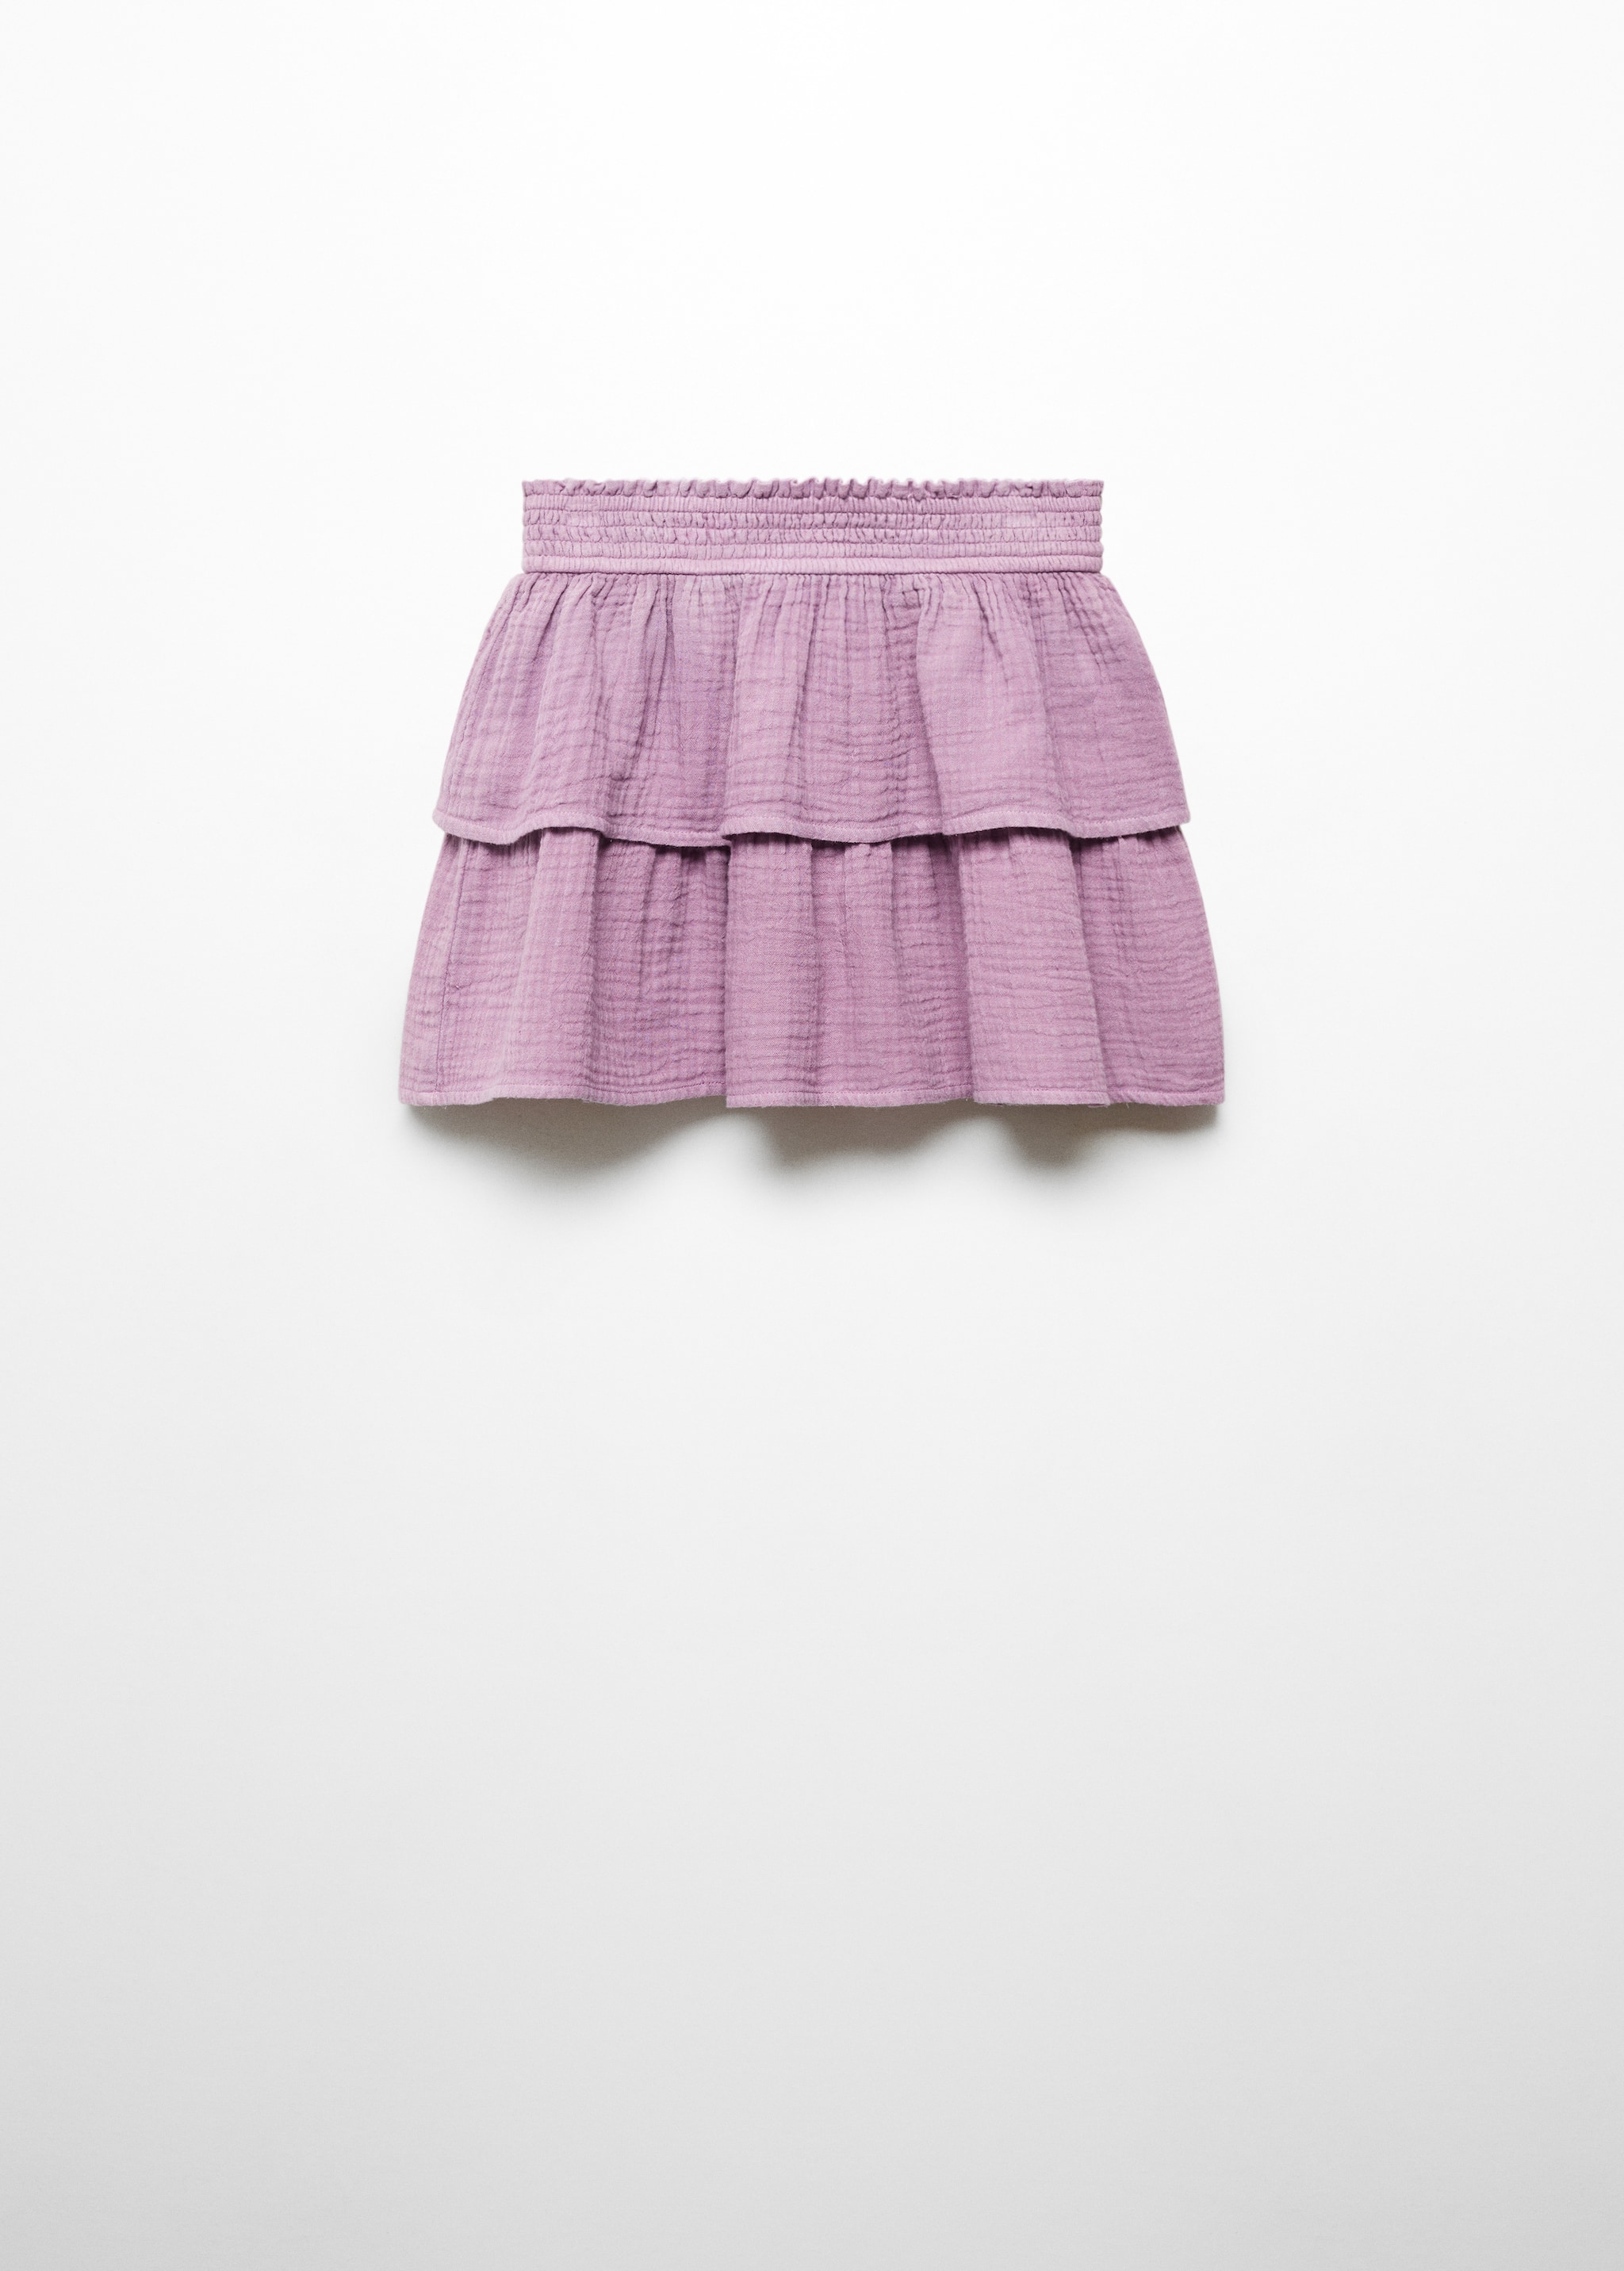 Ruffled cotton skirt - Article without model